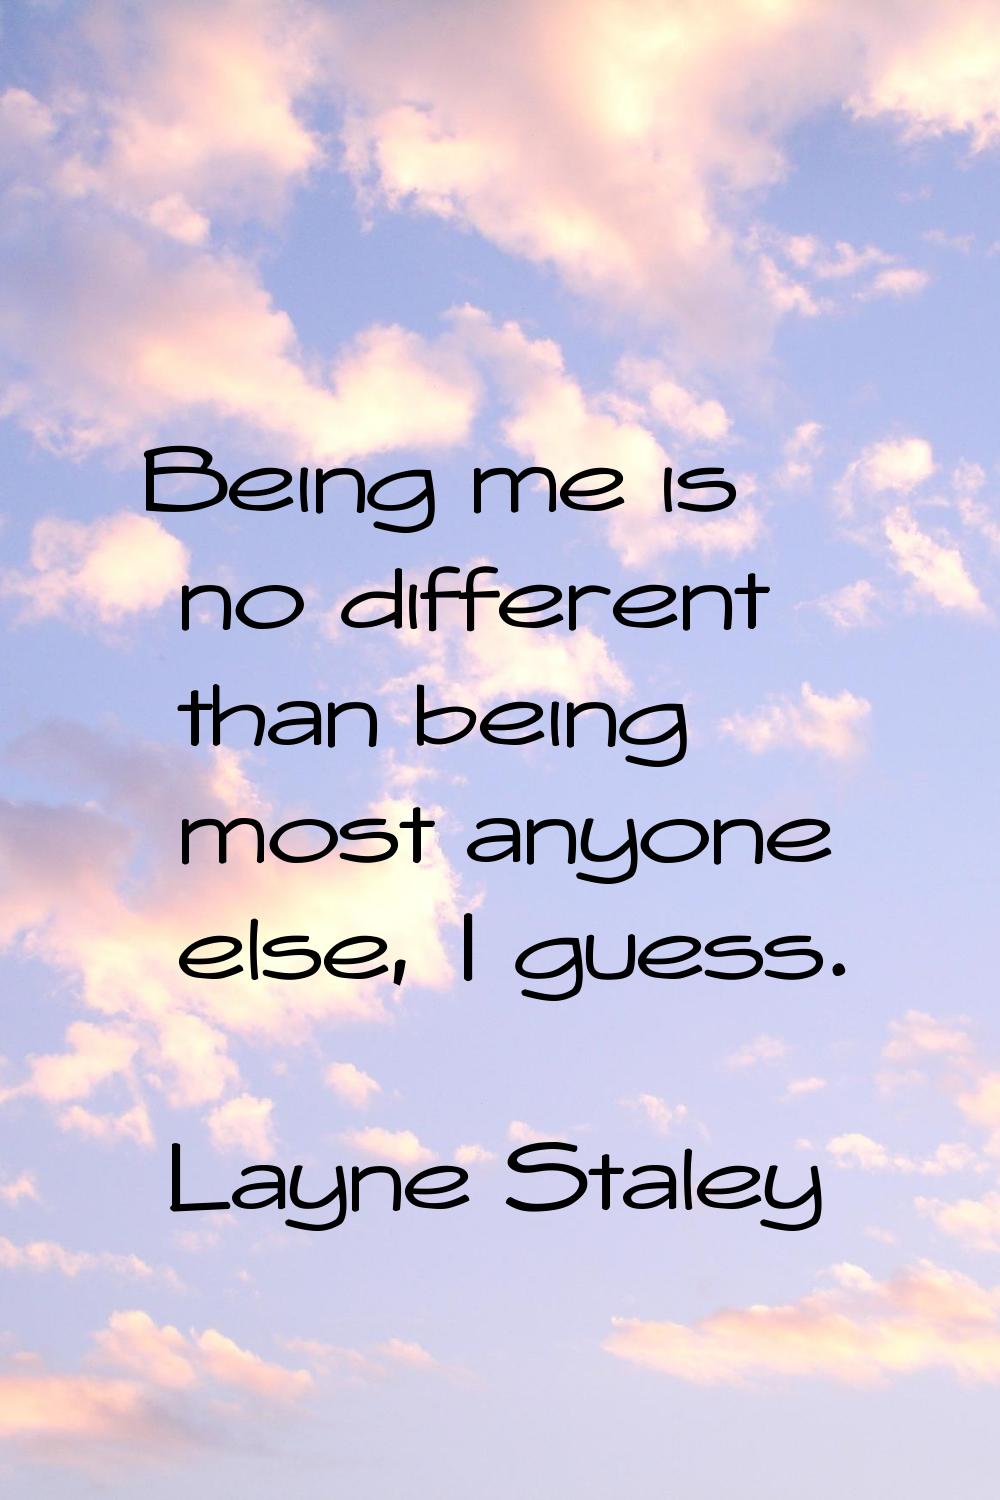 Being me is no different than being most anyone else, I guess.